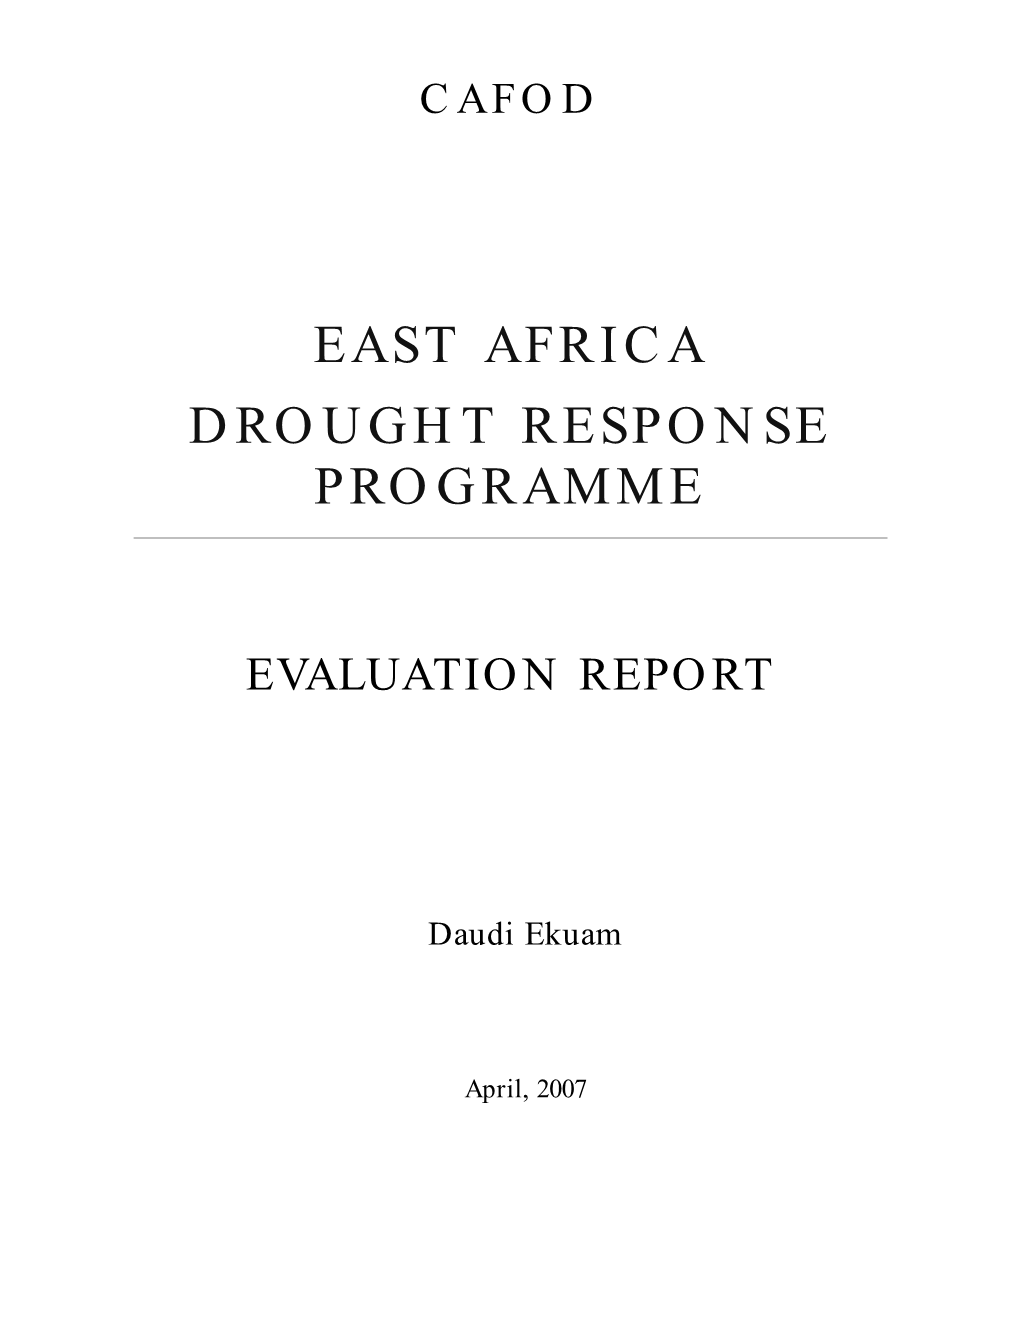 East Africa Drought Response Programme